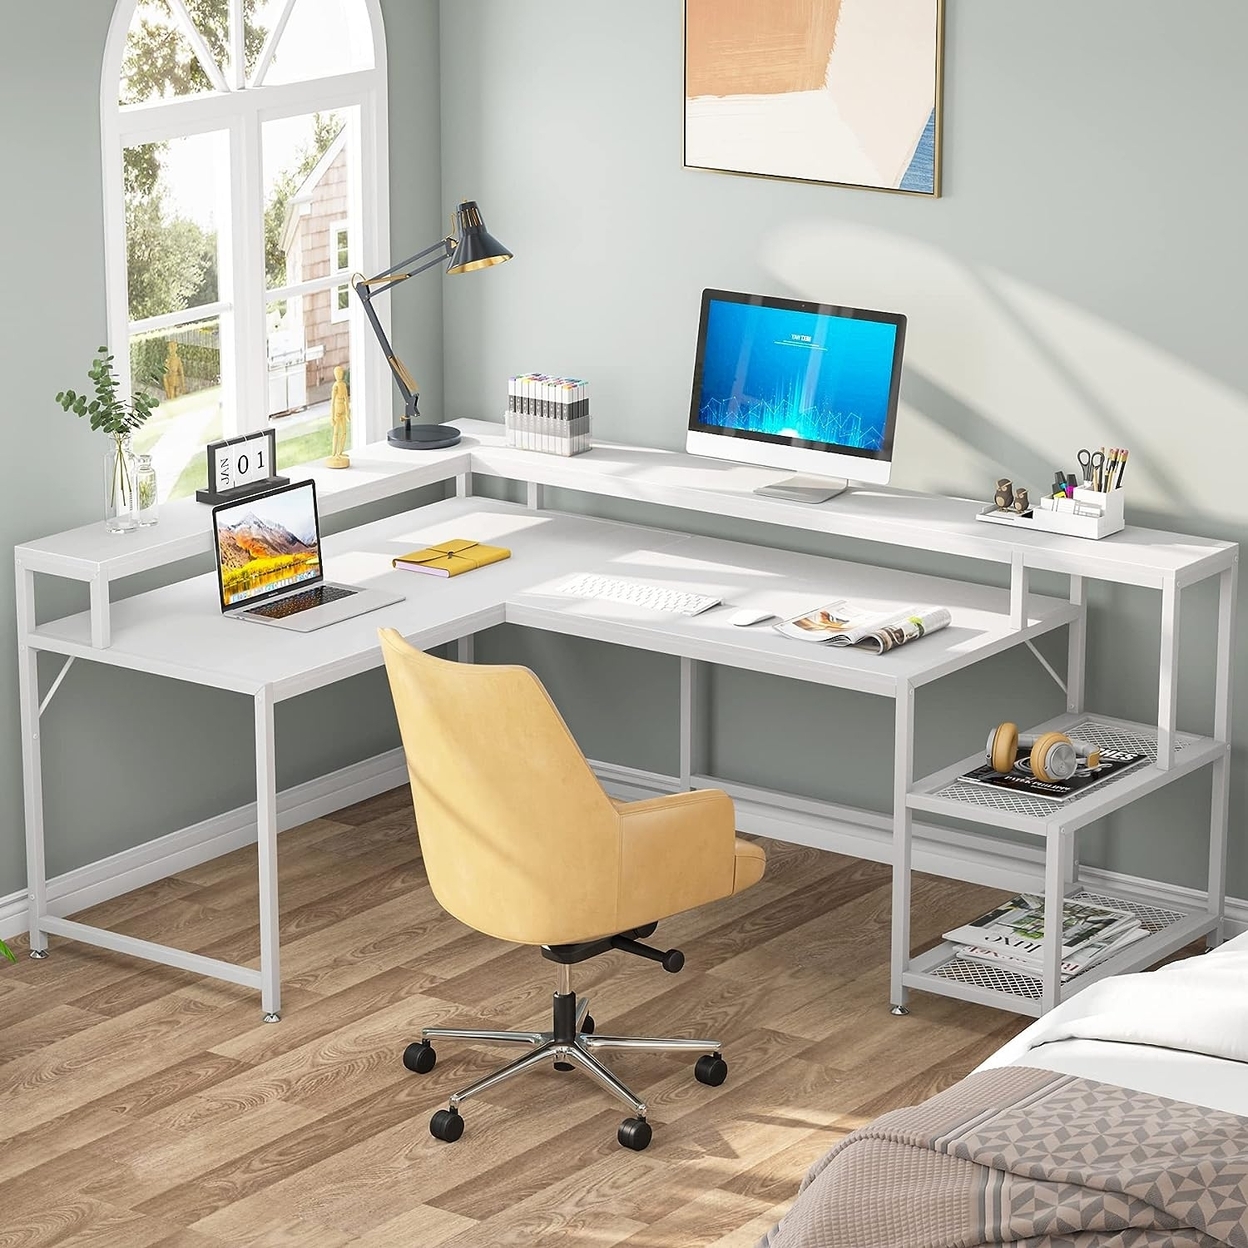 Tribesigns 69 Inch L Shaped Desk With Monitor Stand, Large Reversible Corner Desk With Storage Shelf - White